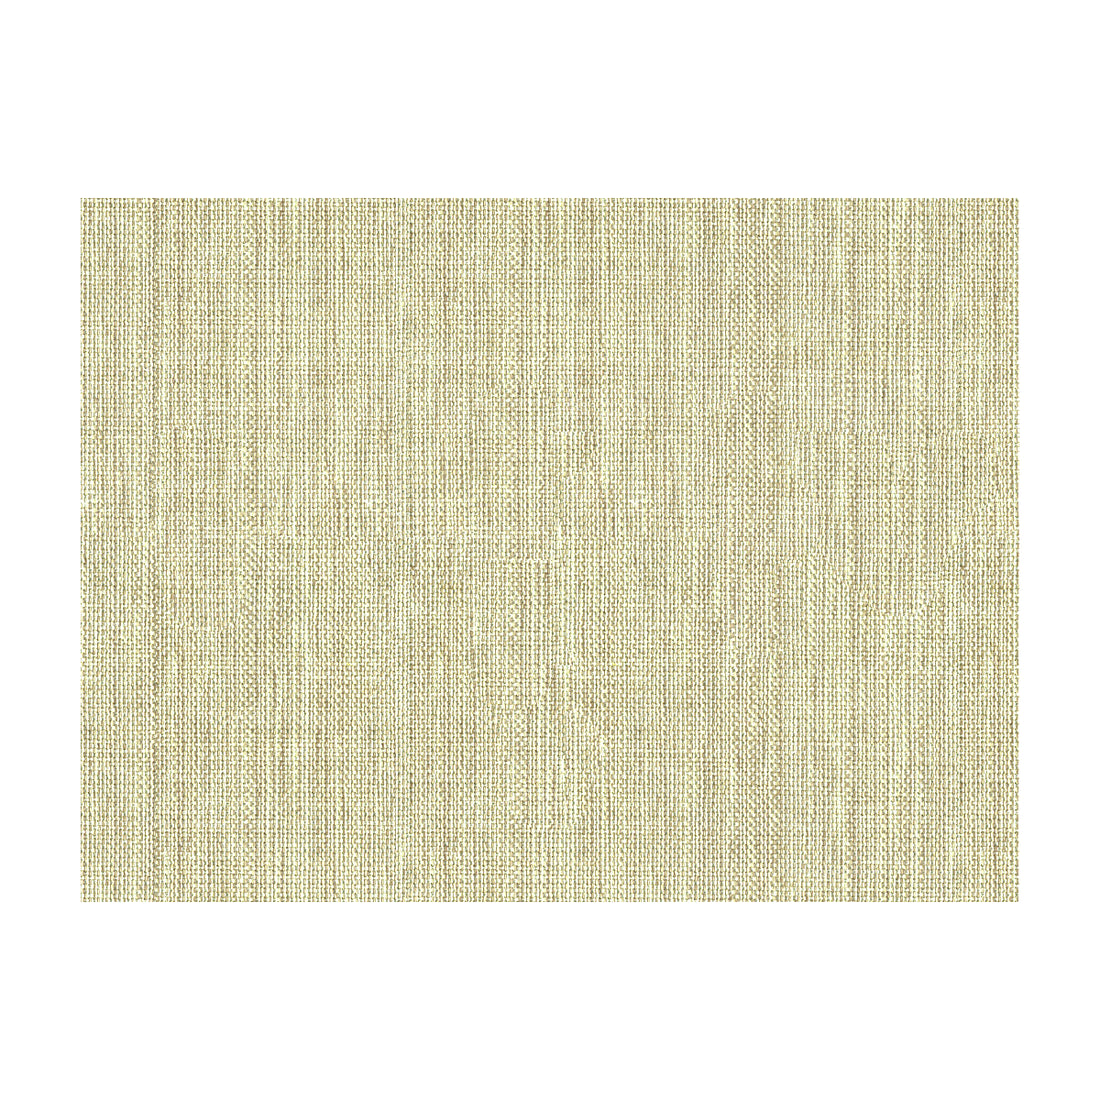 Kravet Basics fabric in 30299-161 color - pattern 30299.161.0 - by Kravet Basics in the Perfect Plains collection